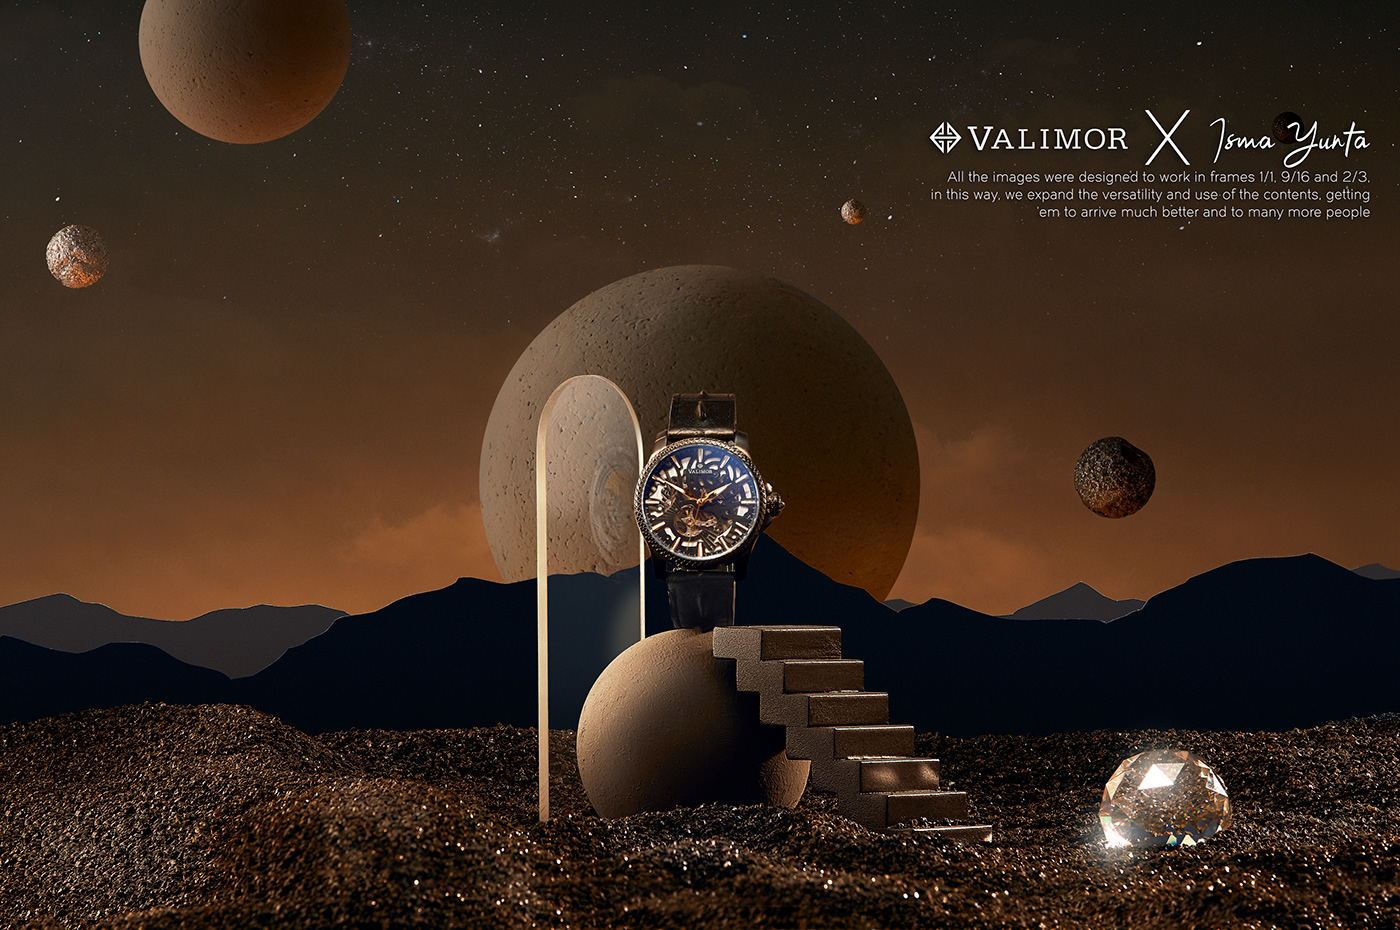 watch in sphere with stairs. world woth planets, sand, mountains and crystal door and elements